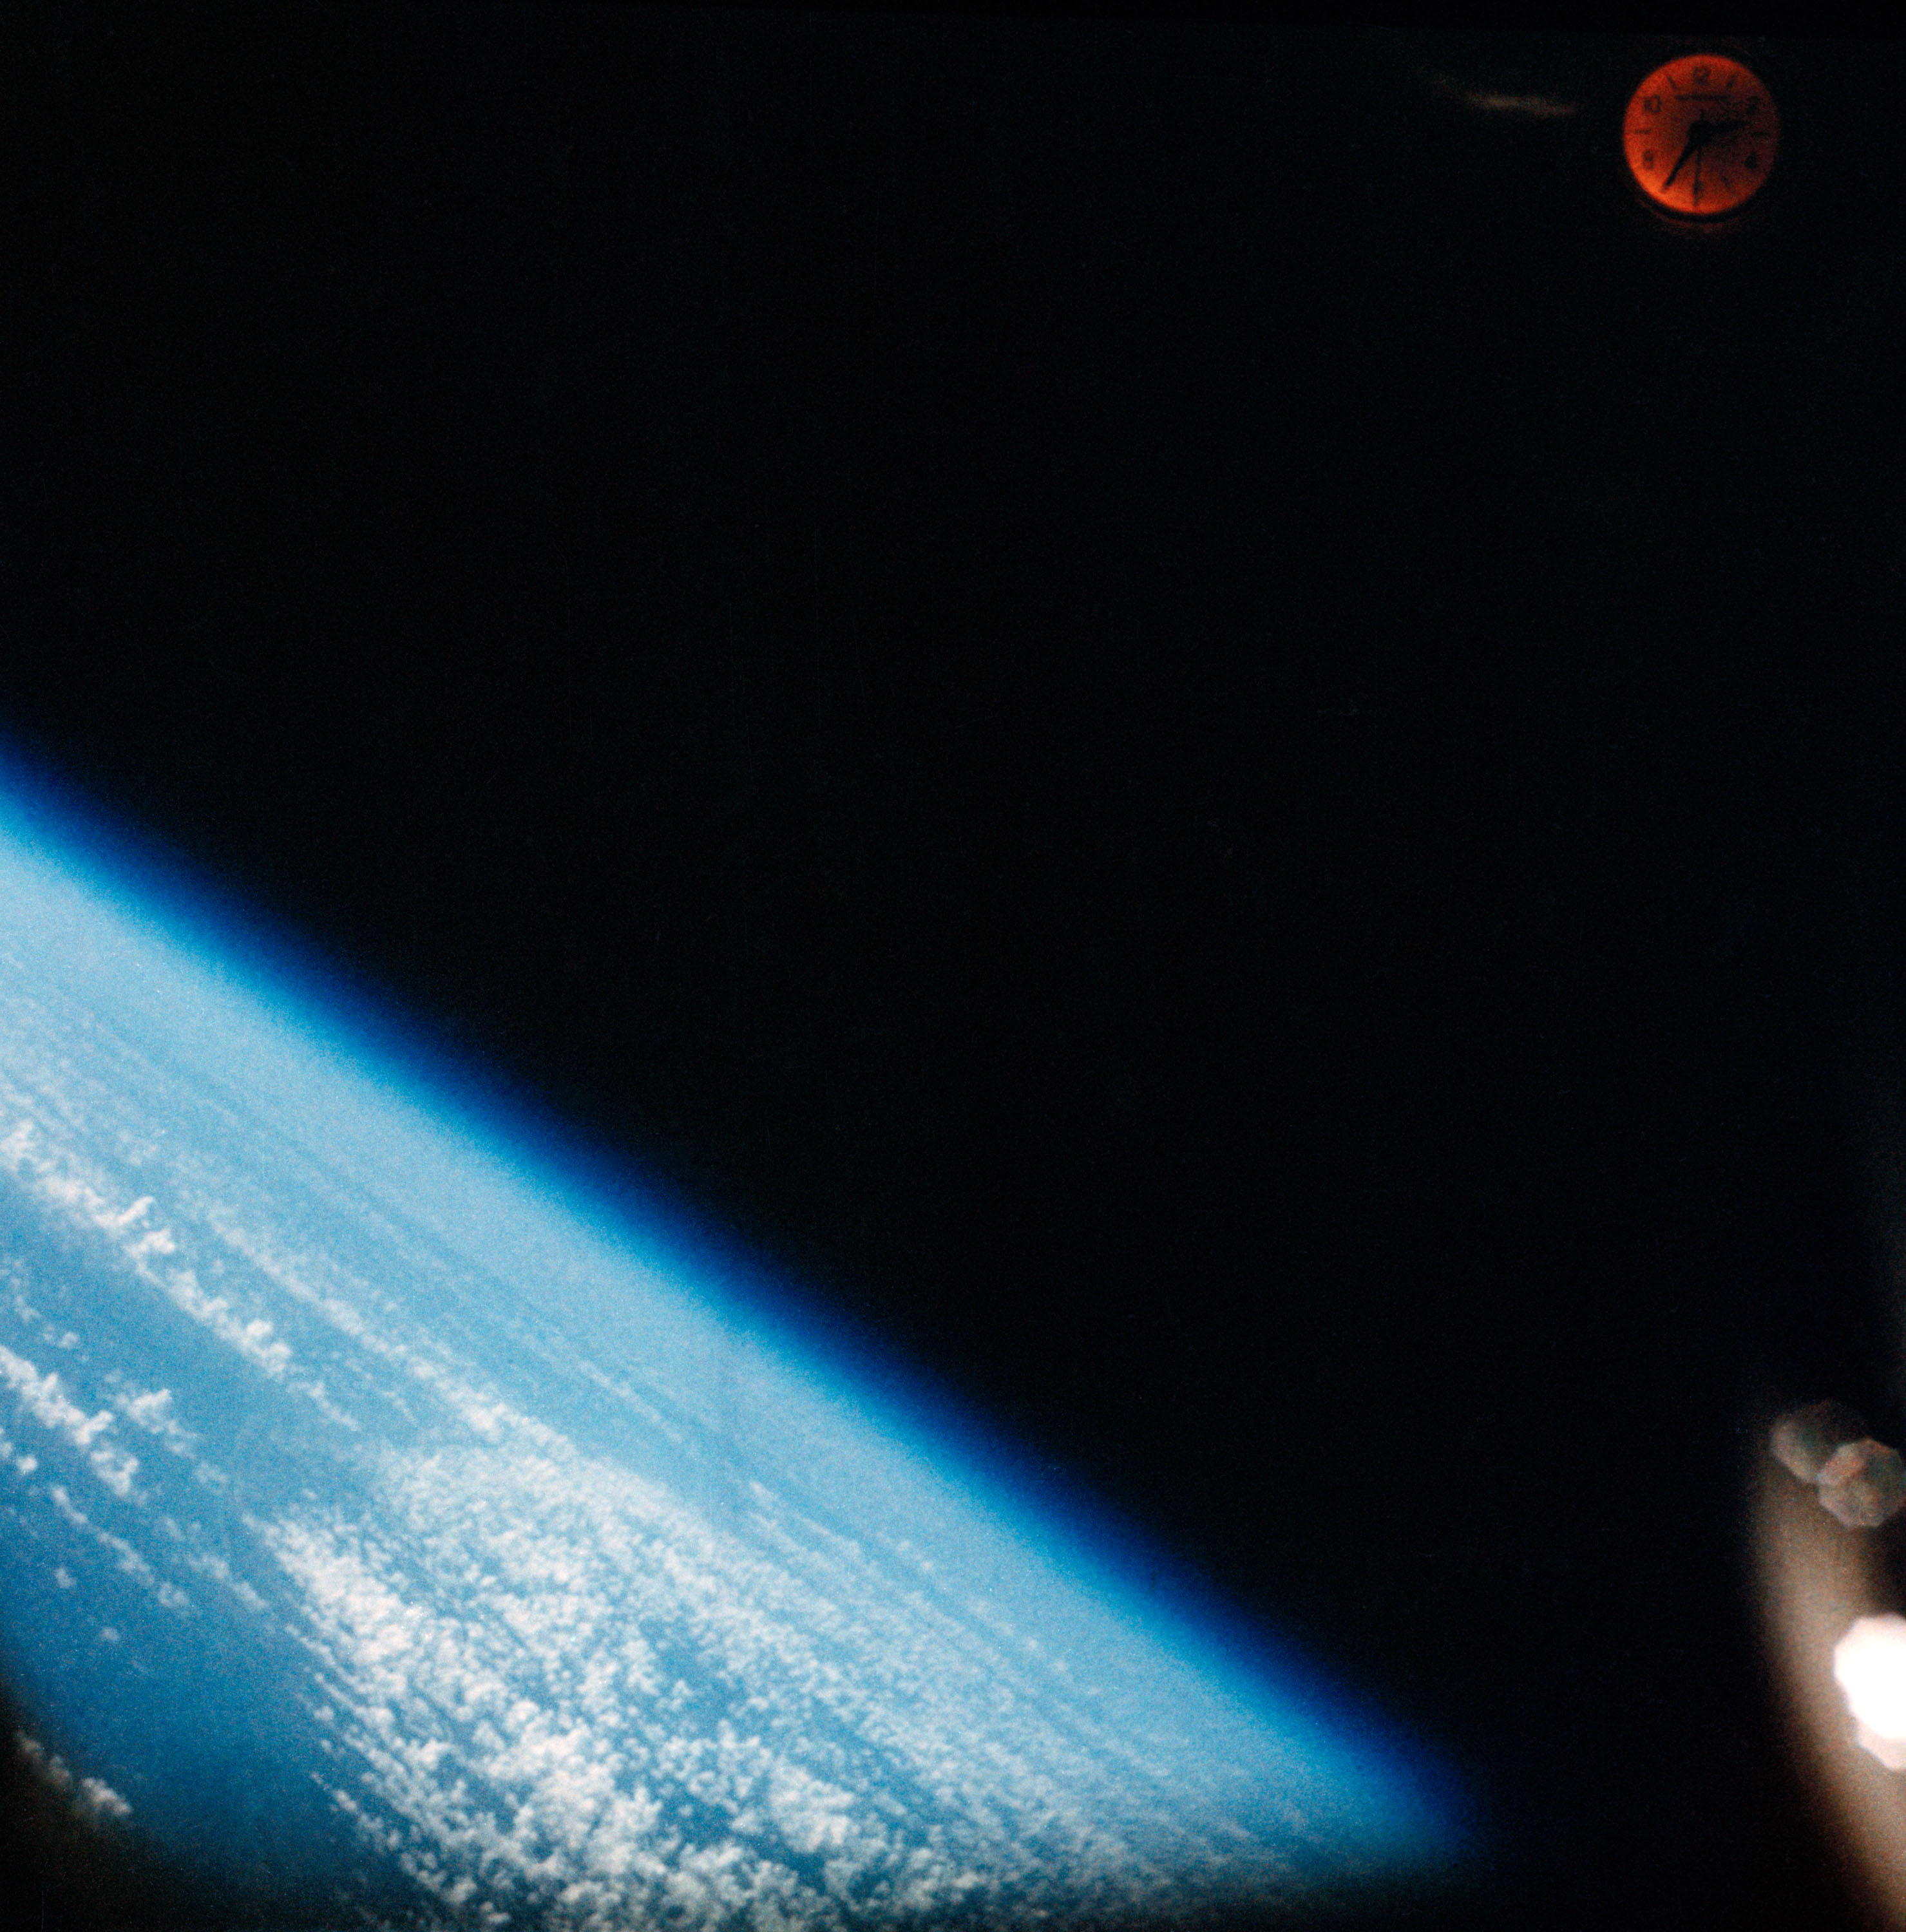 Shepard's 15-minute flight offered him a few minutes of weightlessness and a few minutes to glimpse the grandeur of Earth from space. He was only the second human being to leave the Home Planet. Photo Credit: NASA